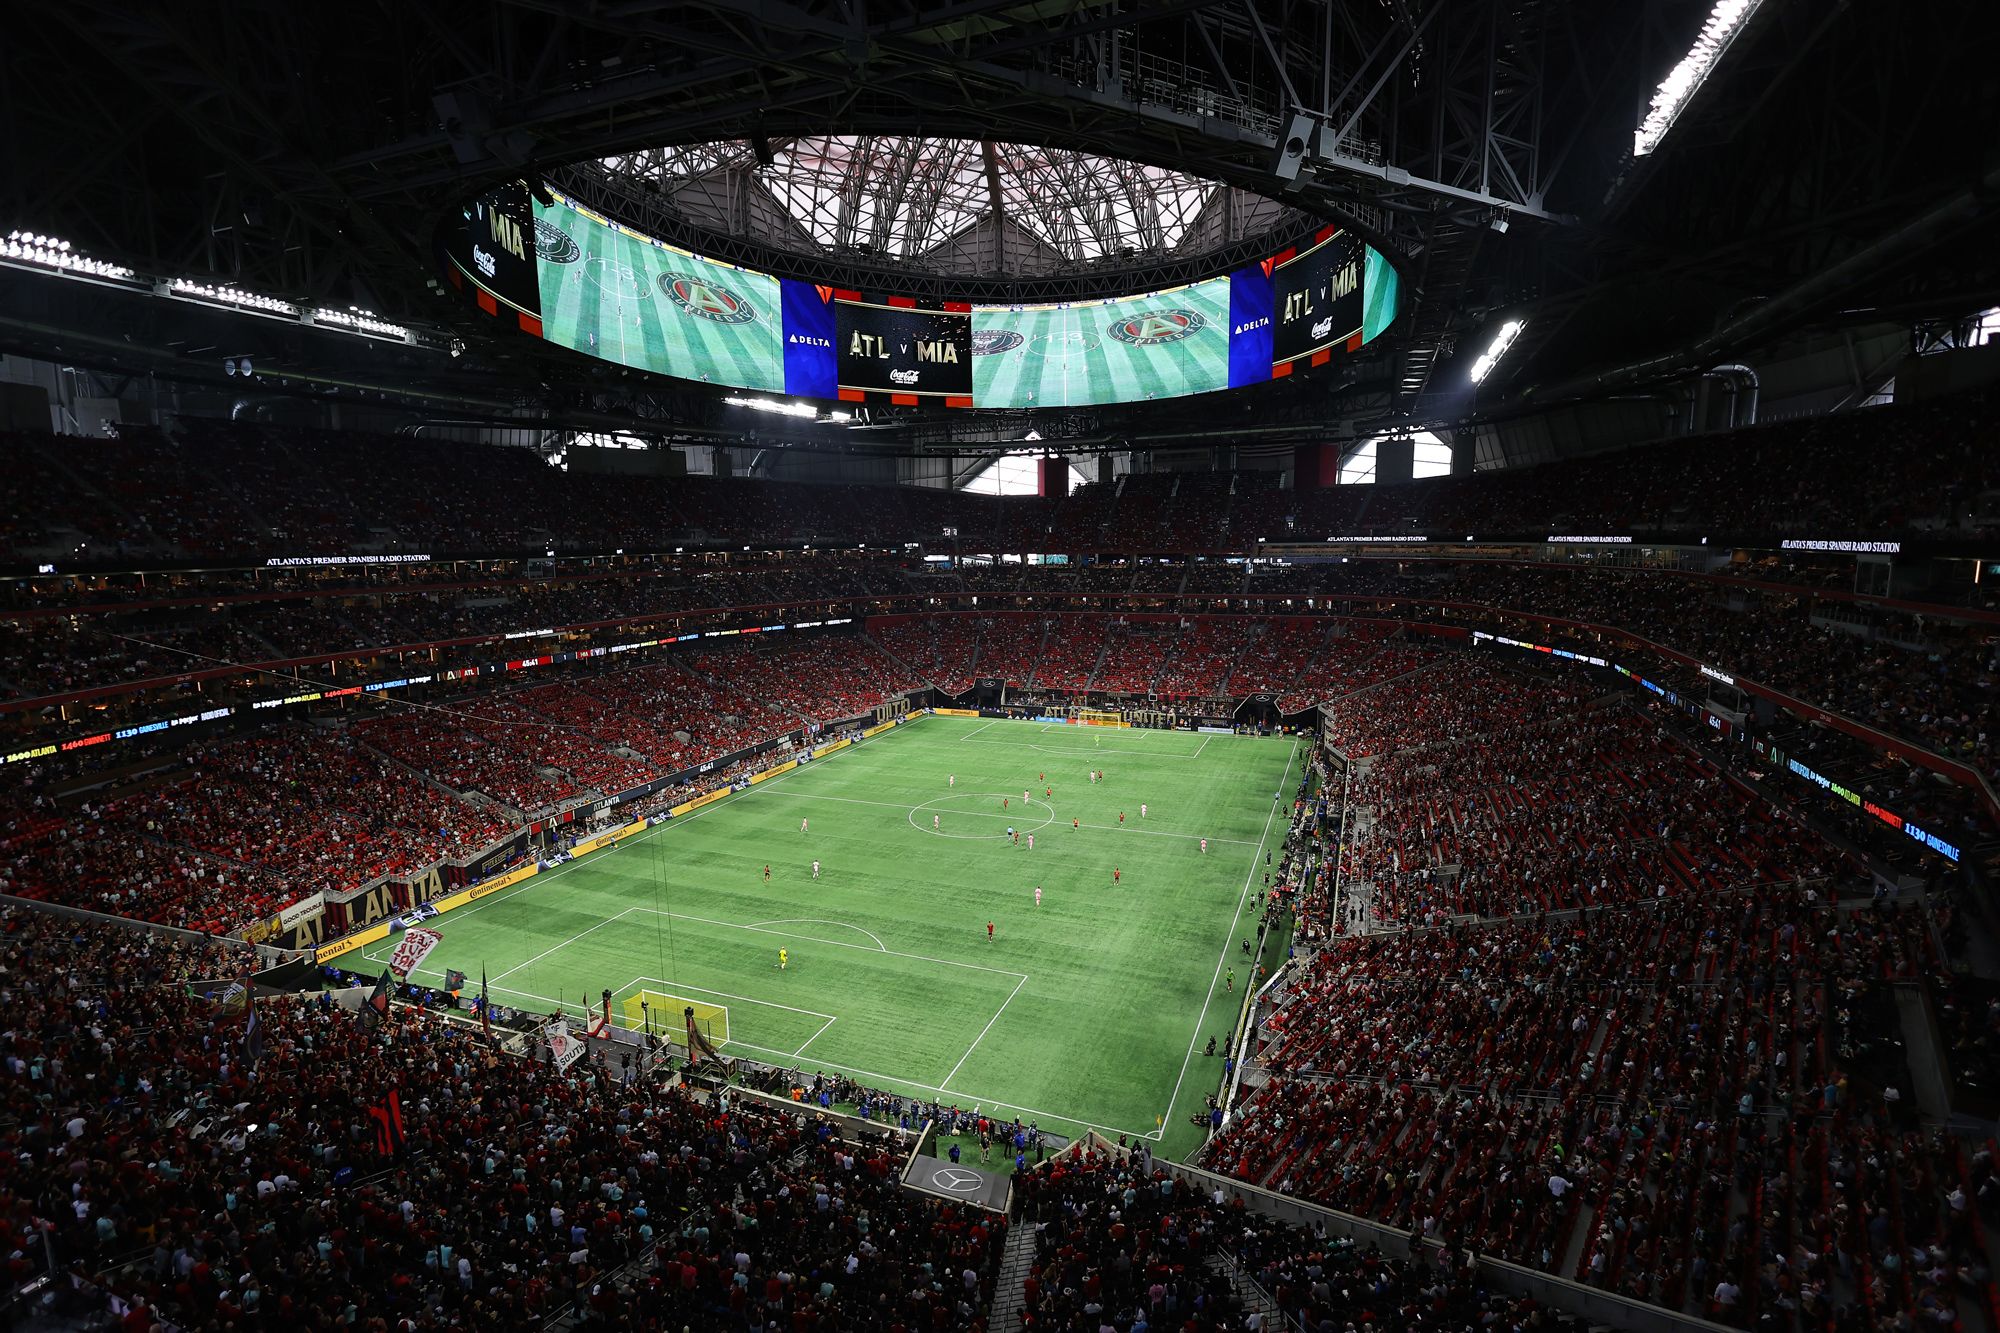 Copa America announces host stadiums for 2024 - Sactown Sports